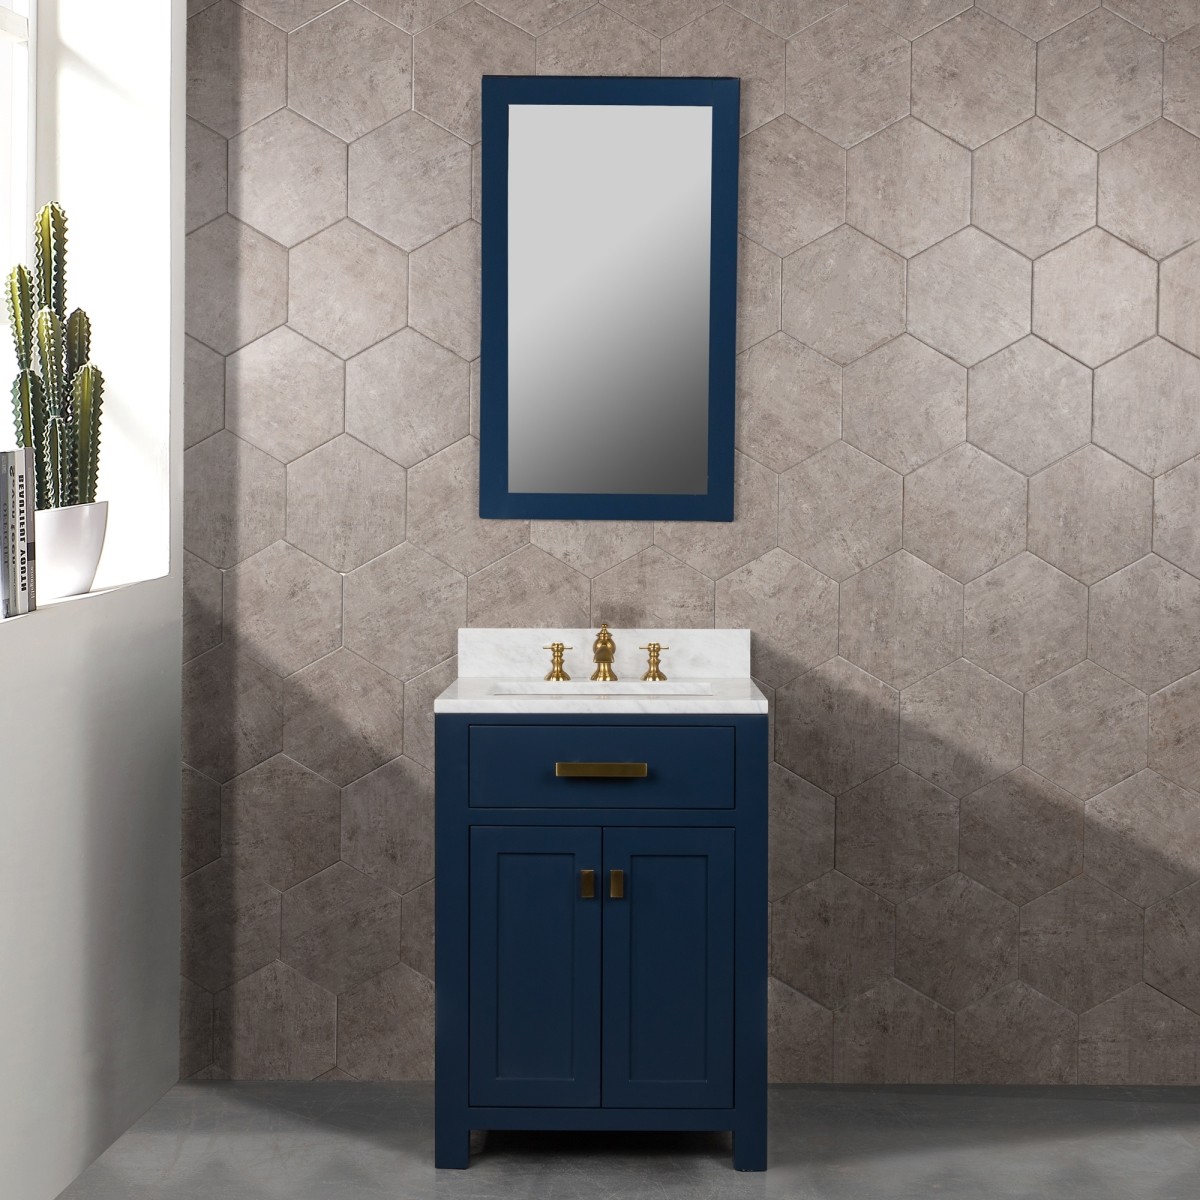 Madison 24-Inch Single Sink Carrara White Marble Vanity In Monarch Blue With Matching Mirror and F2-0013-06-FX Lavatory Faucet